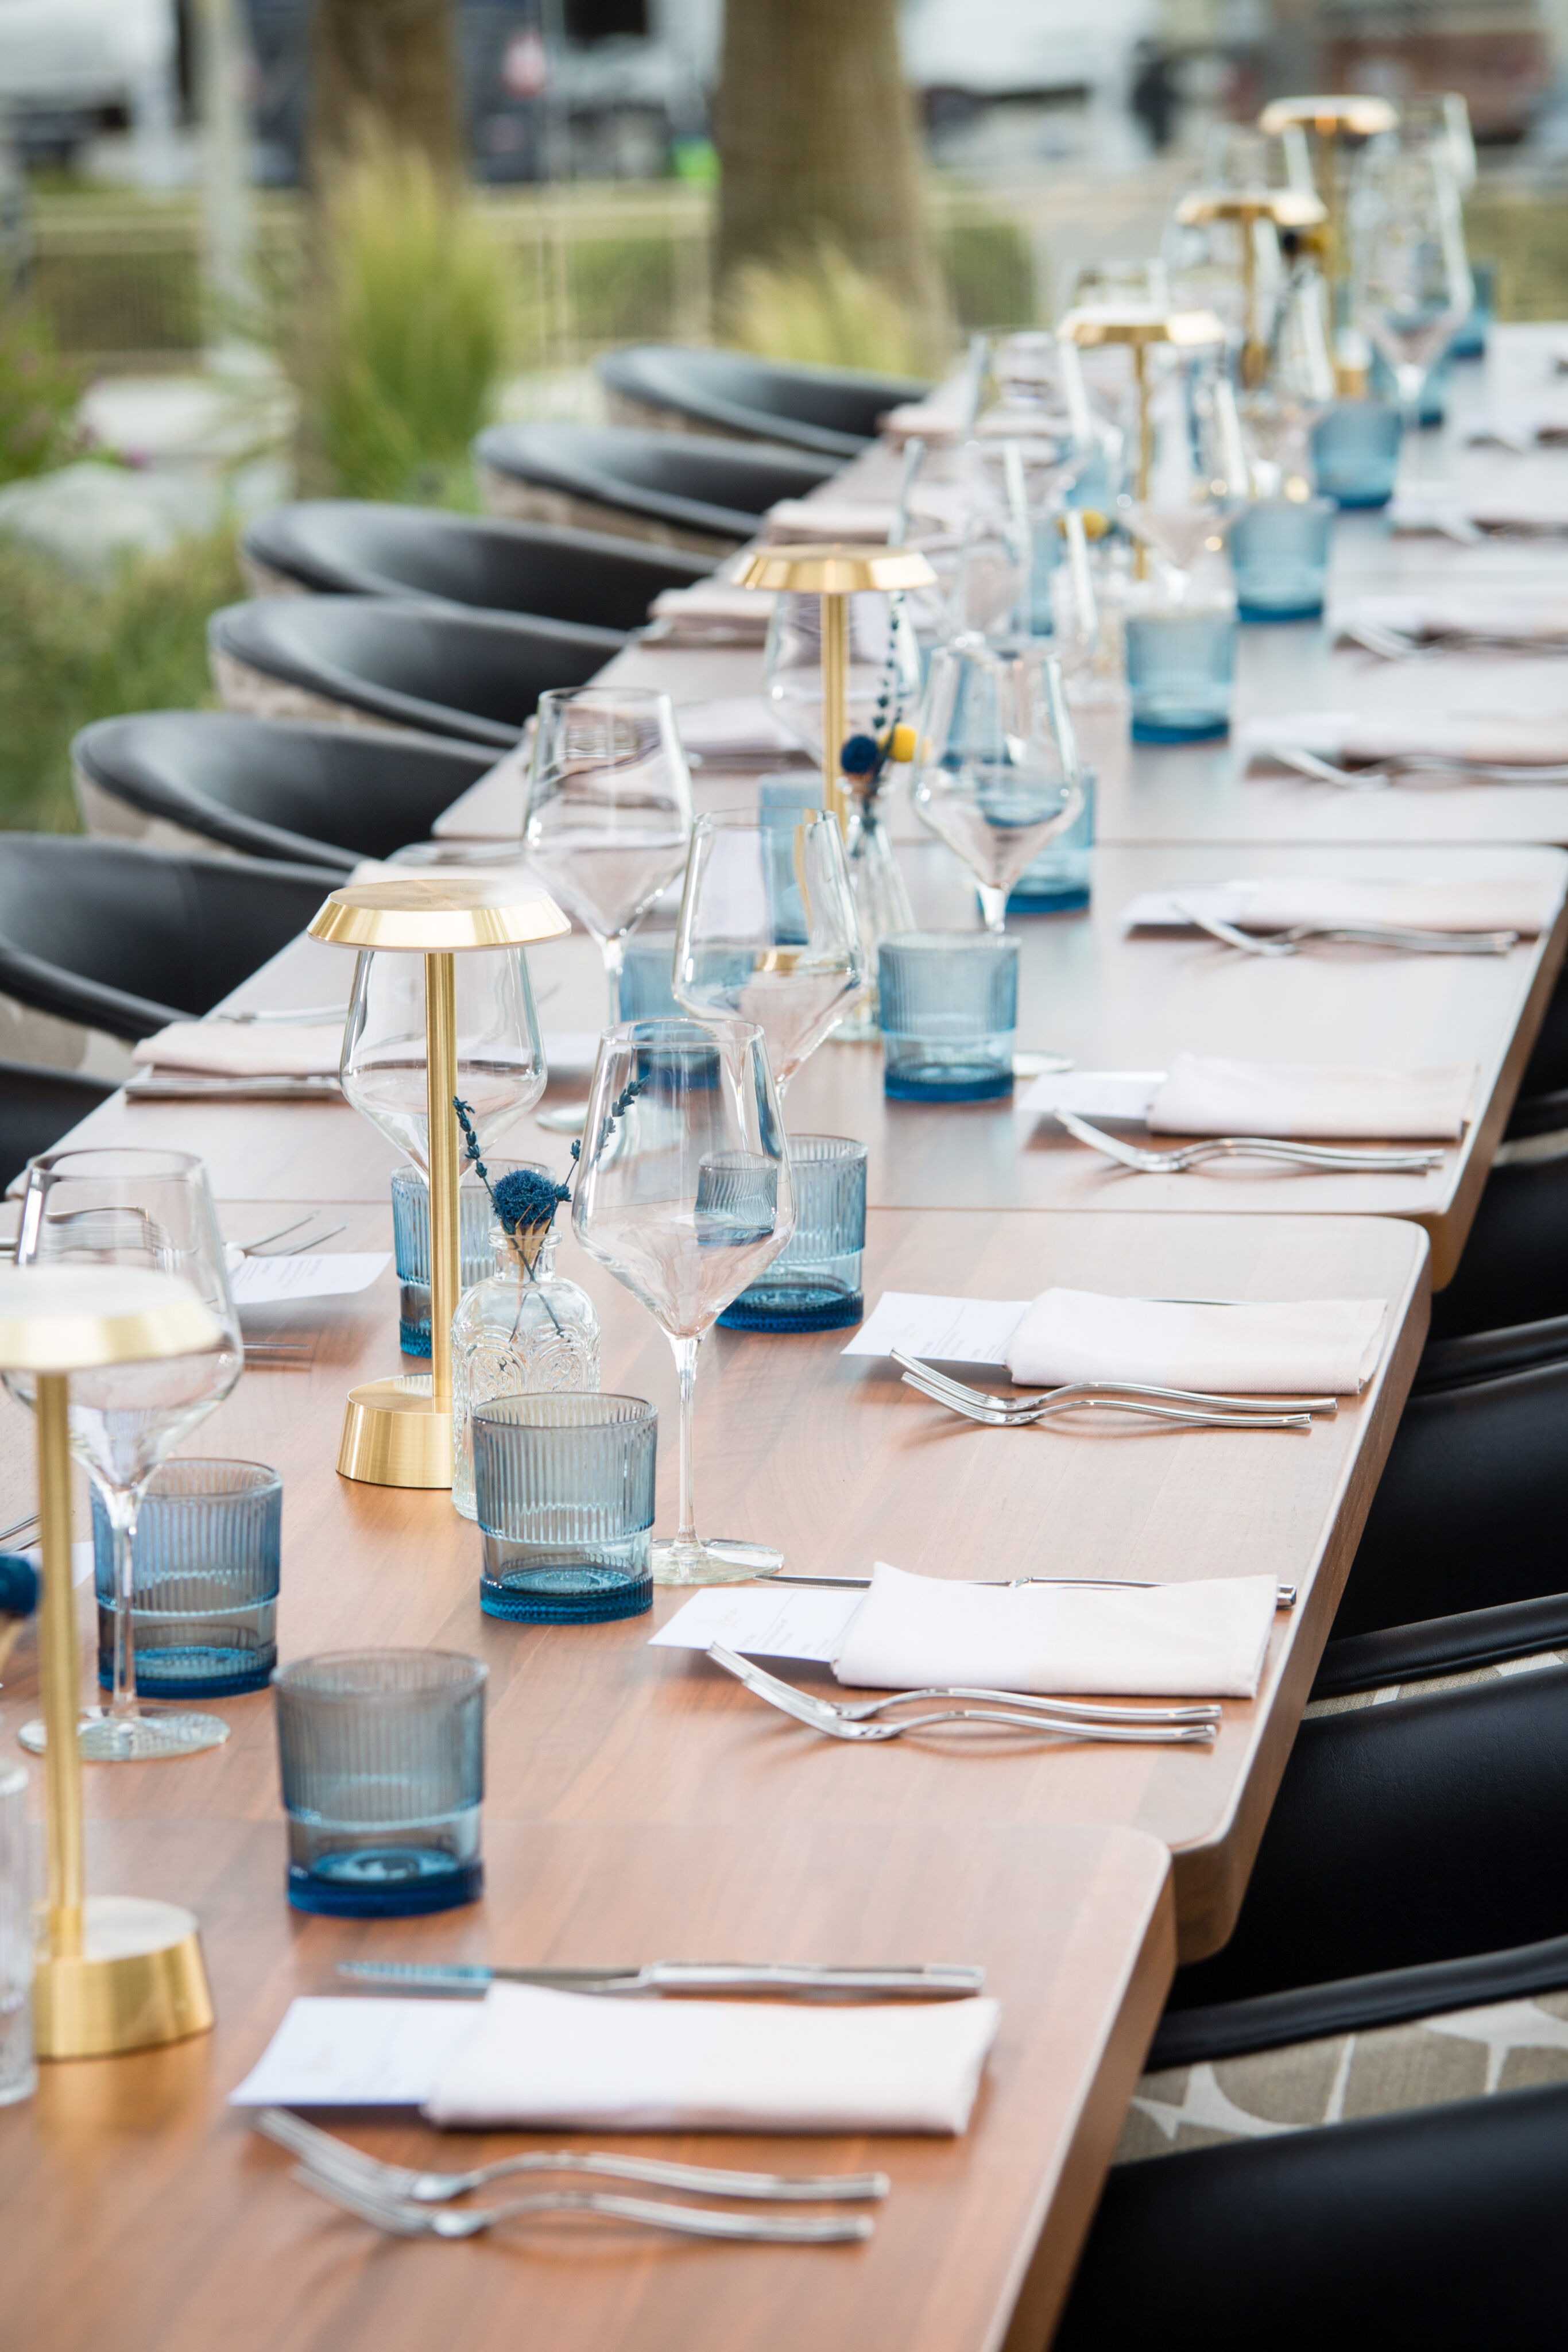 A long dining table is set with blue and clear glasses, gold and white lamps, white napkins, and cutlery. Black chairs are arranged along both sides of the table.